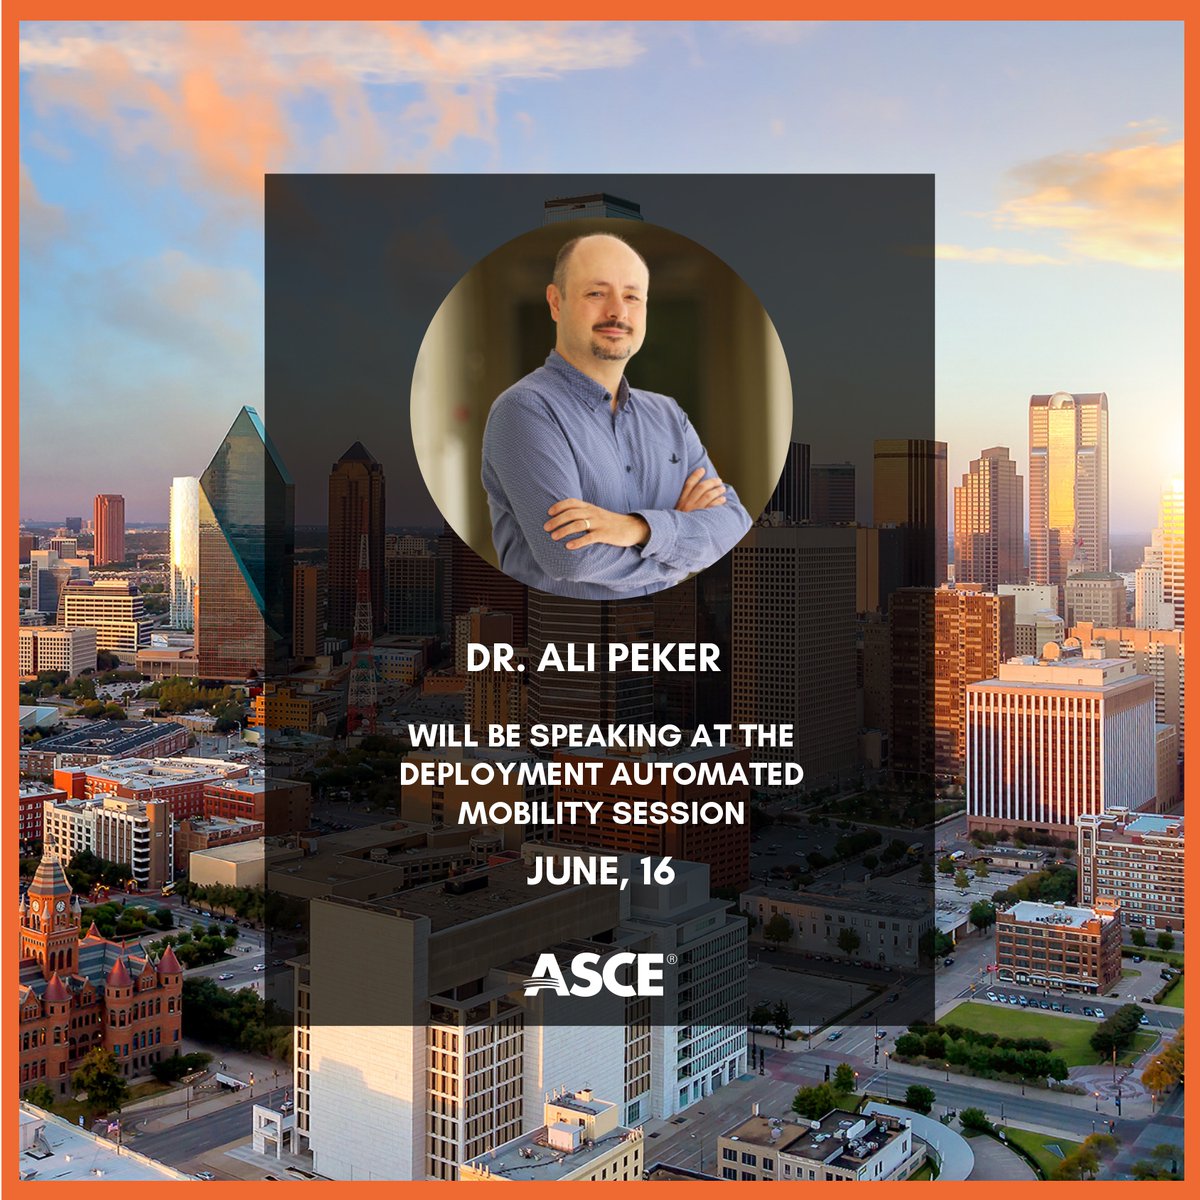 Join us at the ASCE event in Austin, Texas, from June 14-17, and don't miss the deployment automated mobility session on June 16. CEO of ADASTEC Corp. Dr. Ufuk will be speaking at the event. 🎤

#technology #automateddriving #smartcity #ADASTEC #automatedvehicles